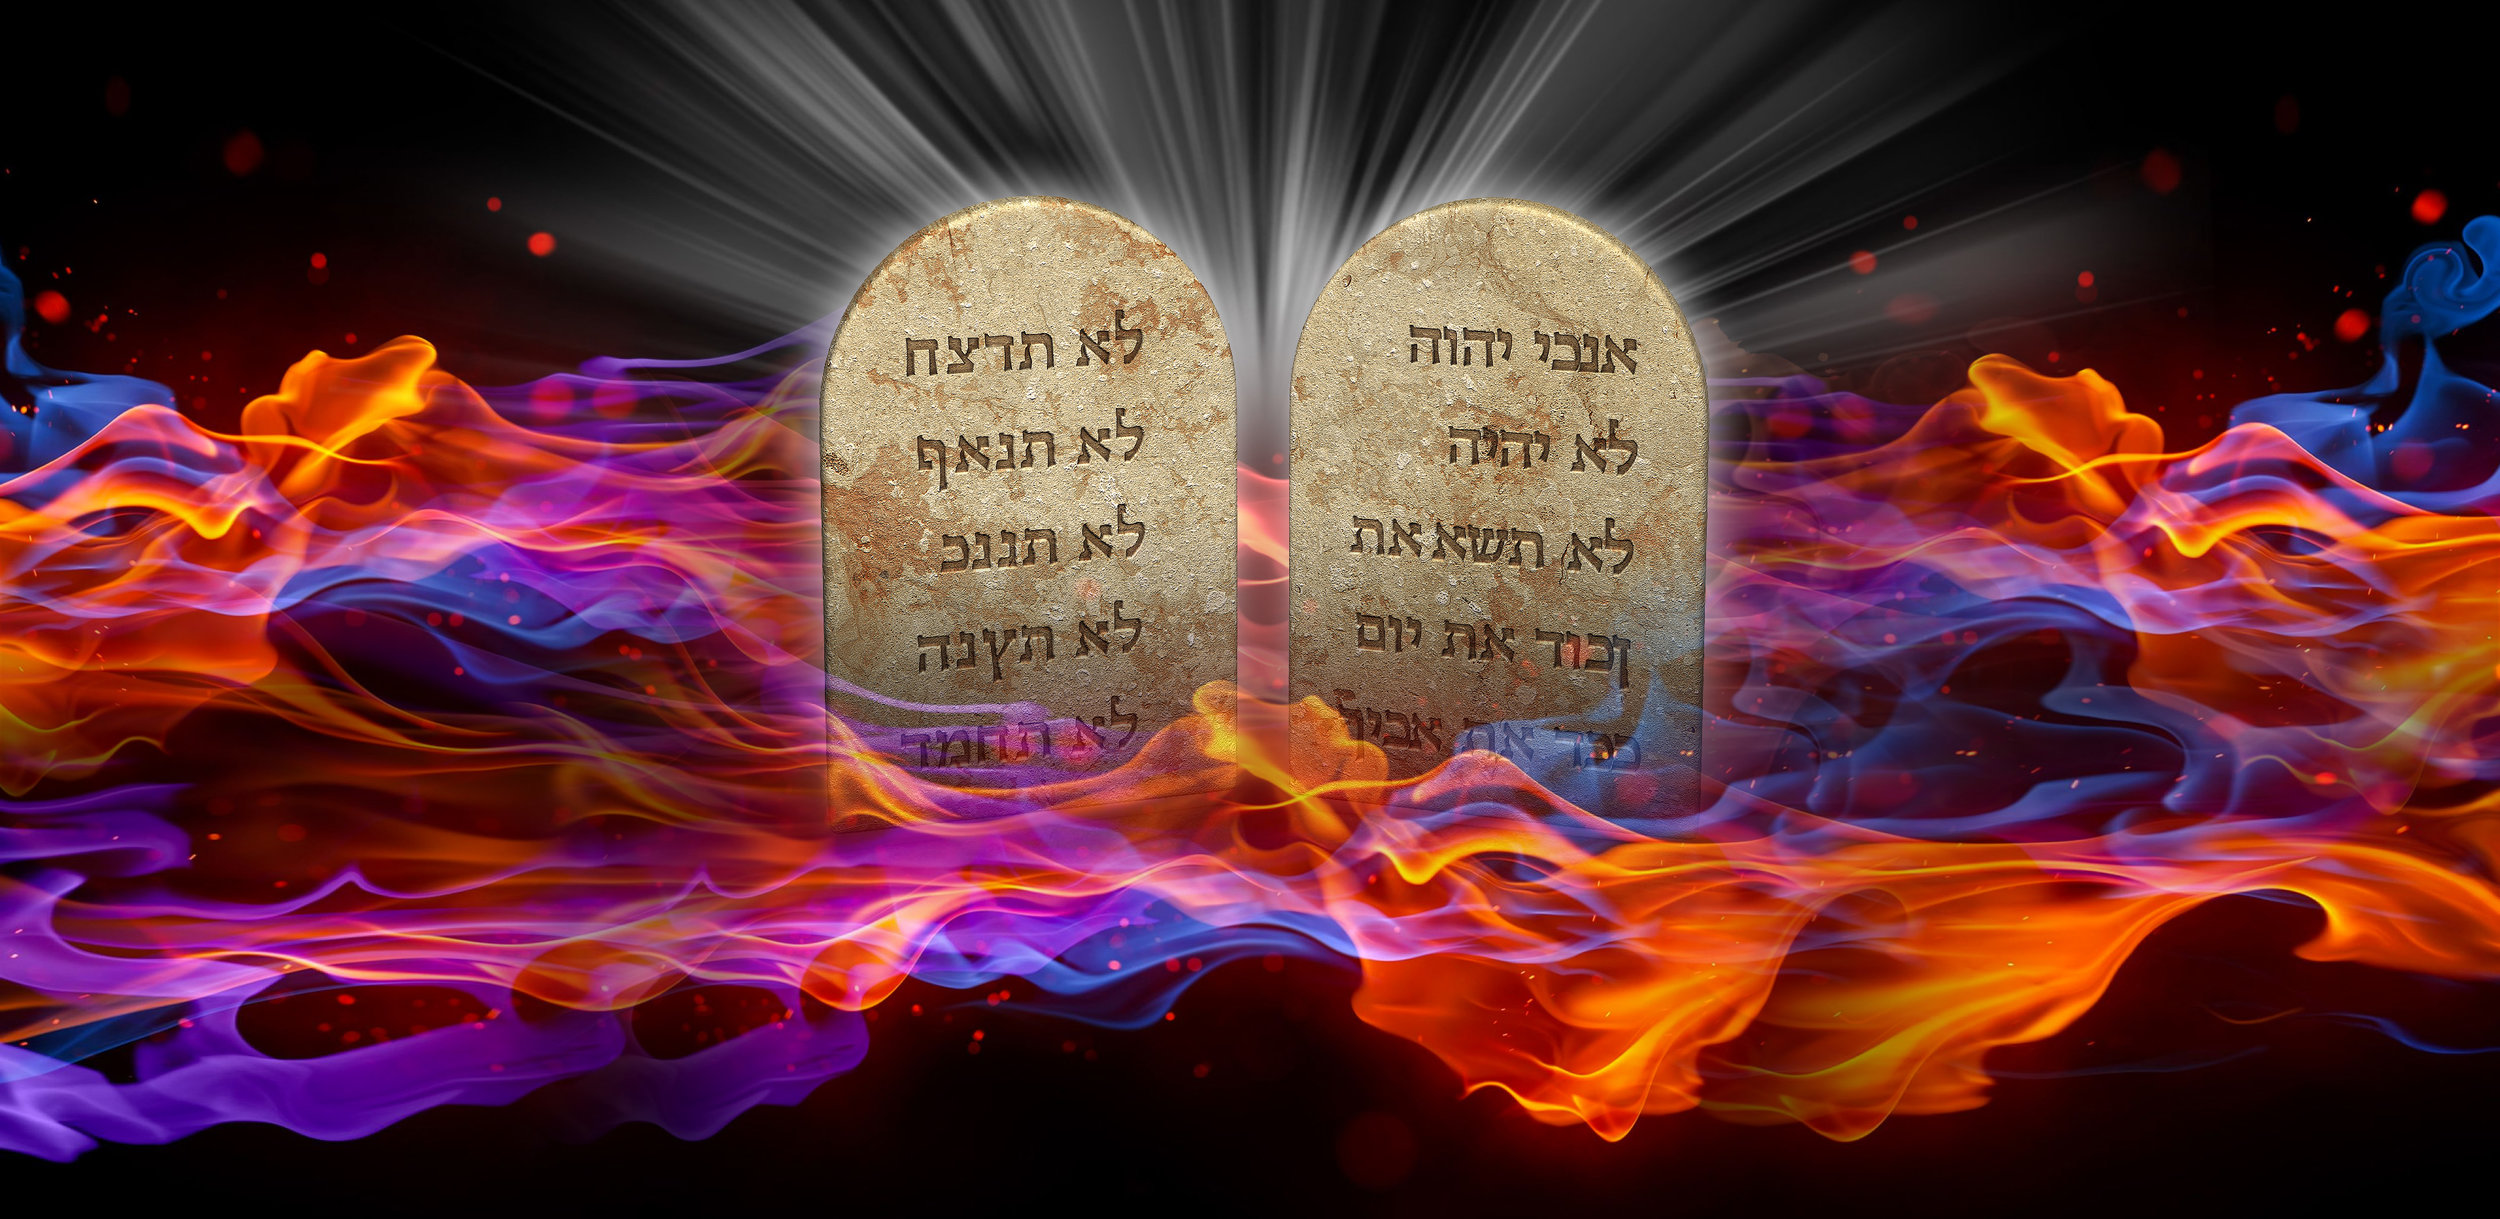   The Ten Commandments   Unearth new meaning behind the Ten commandments and learn to become holy, consecrated, and righteous to Yahveh   Learn More  